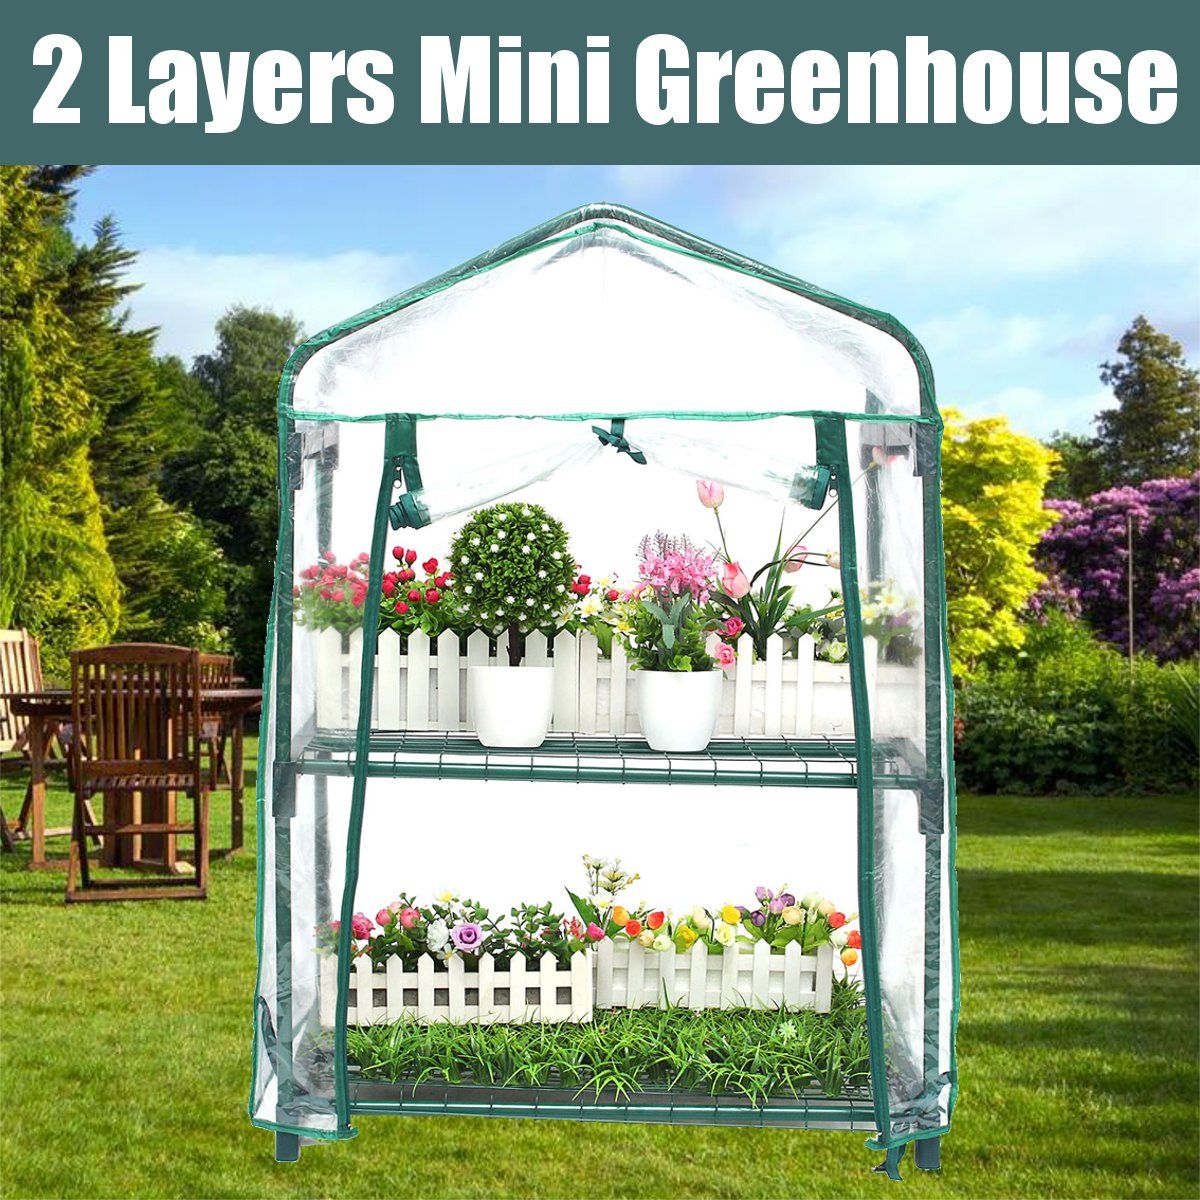 2-Layers-Mini-Greenhouse-Home-Outdoor-Flower-Plant-Pot-Gardening-Winter-Shelves-1577618